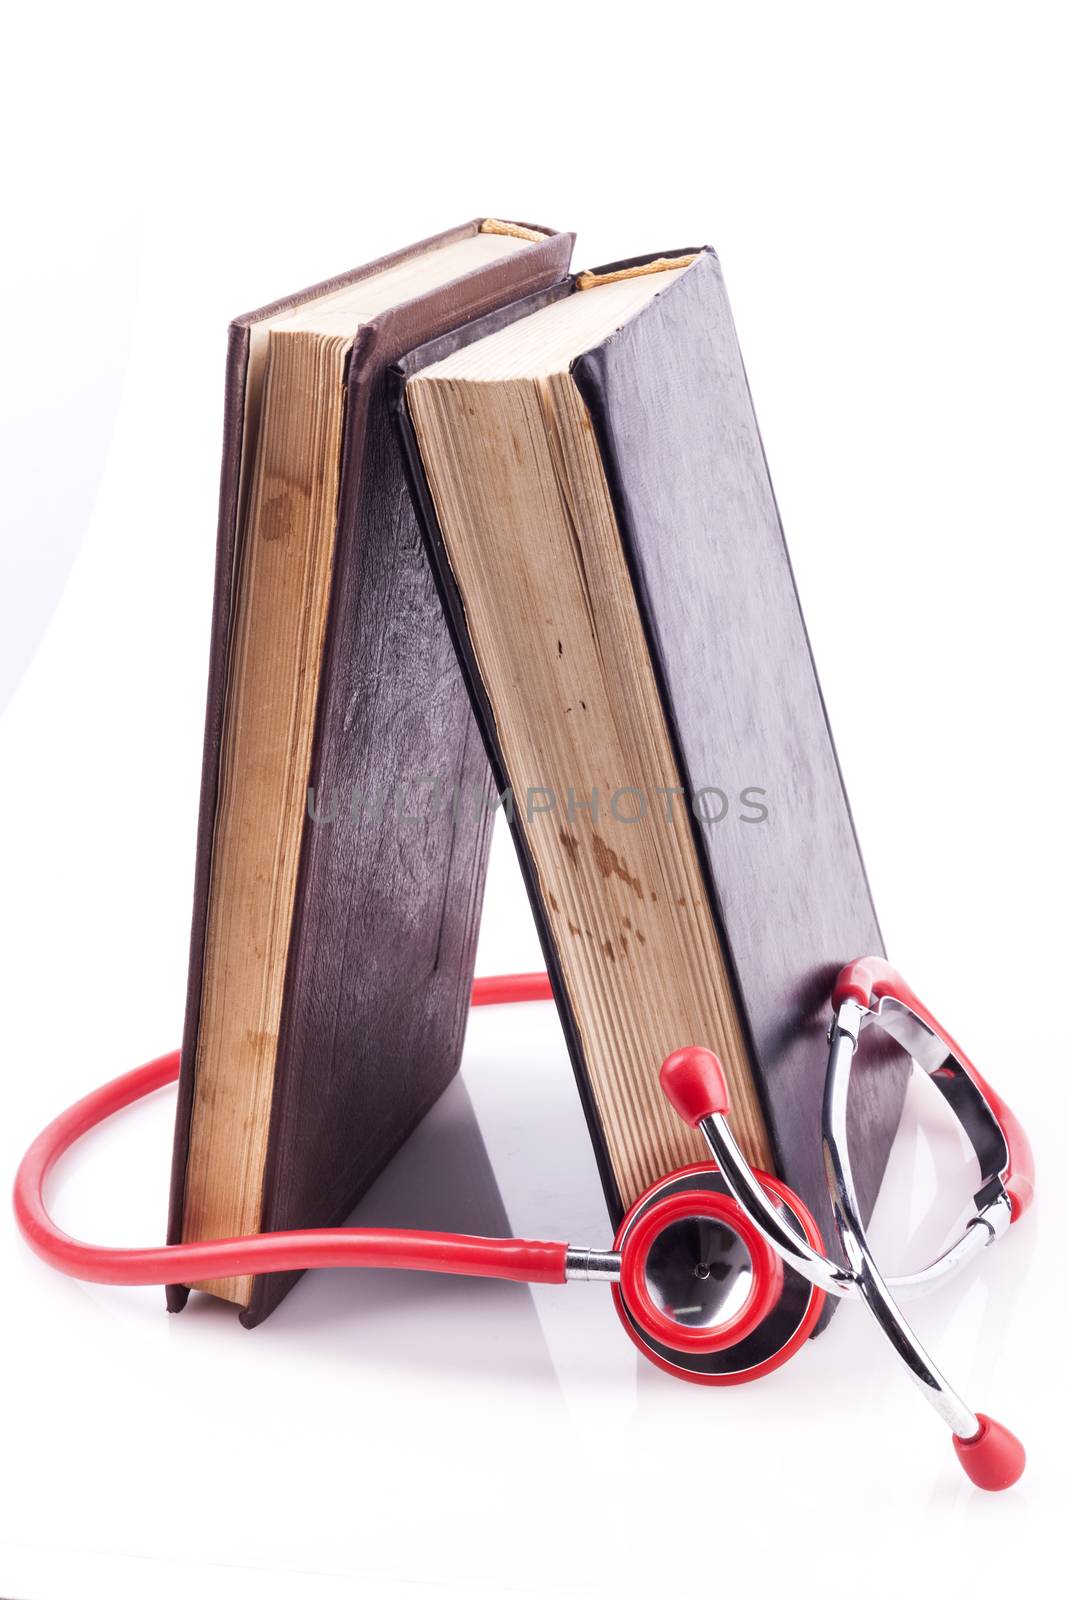 Red Stethoscope with Two Books on White background and Reflection